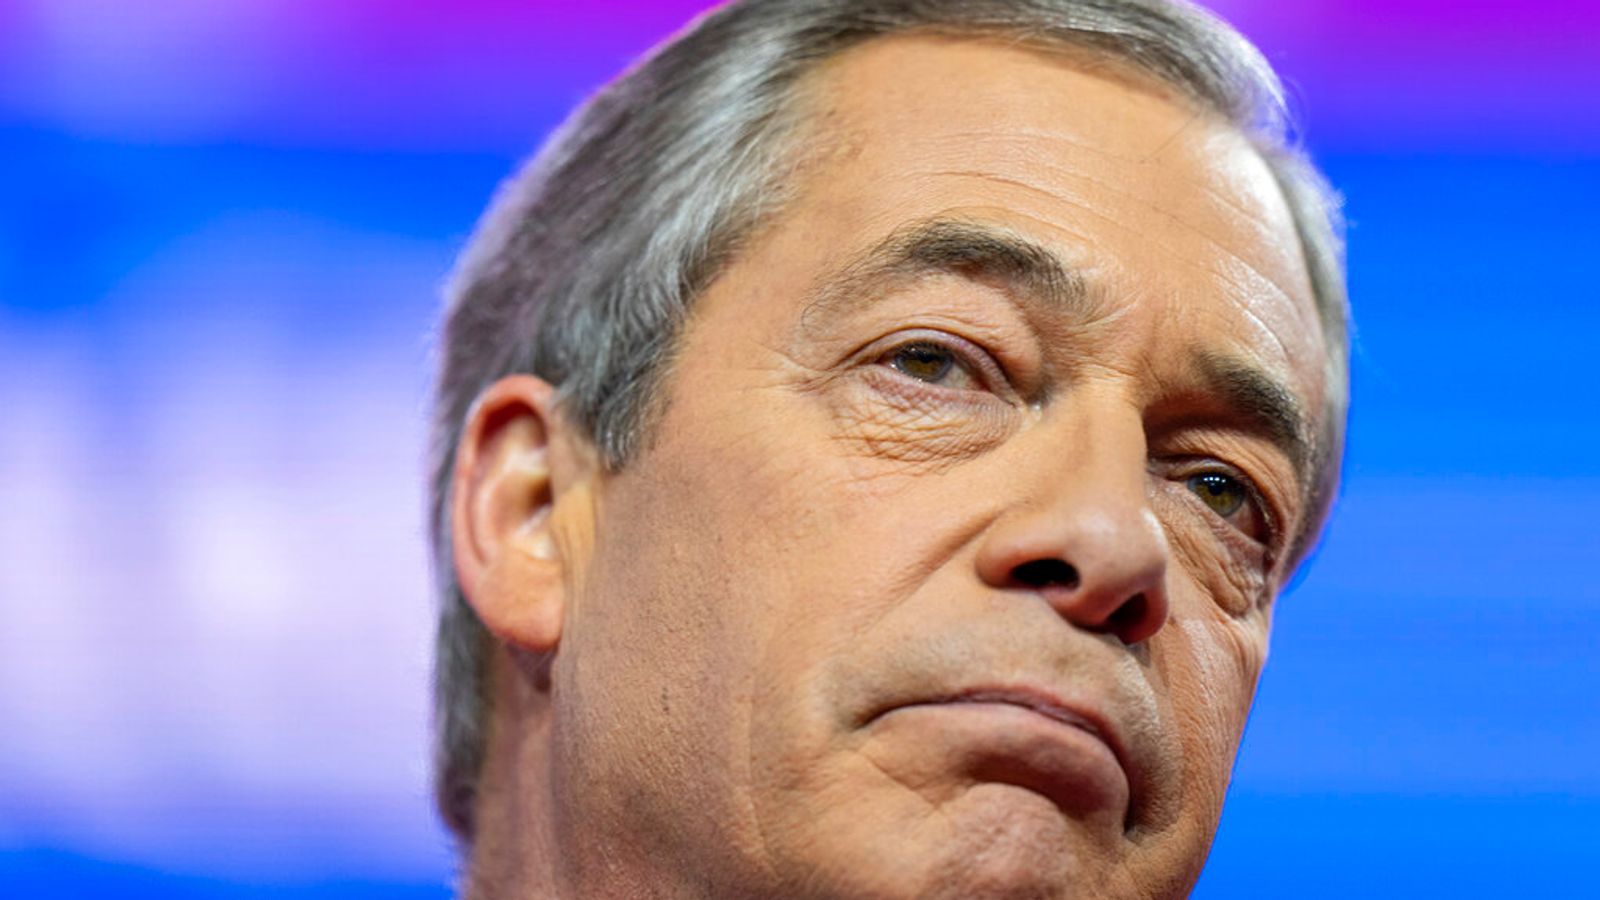 Nigel Farage claims Coutts bank account was shut down over his 'values'